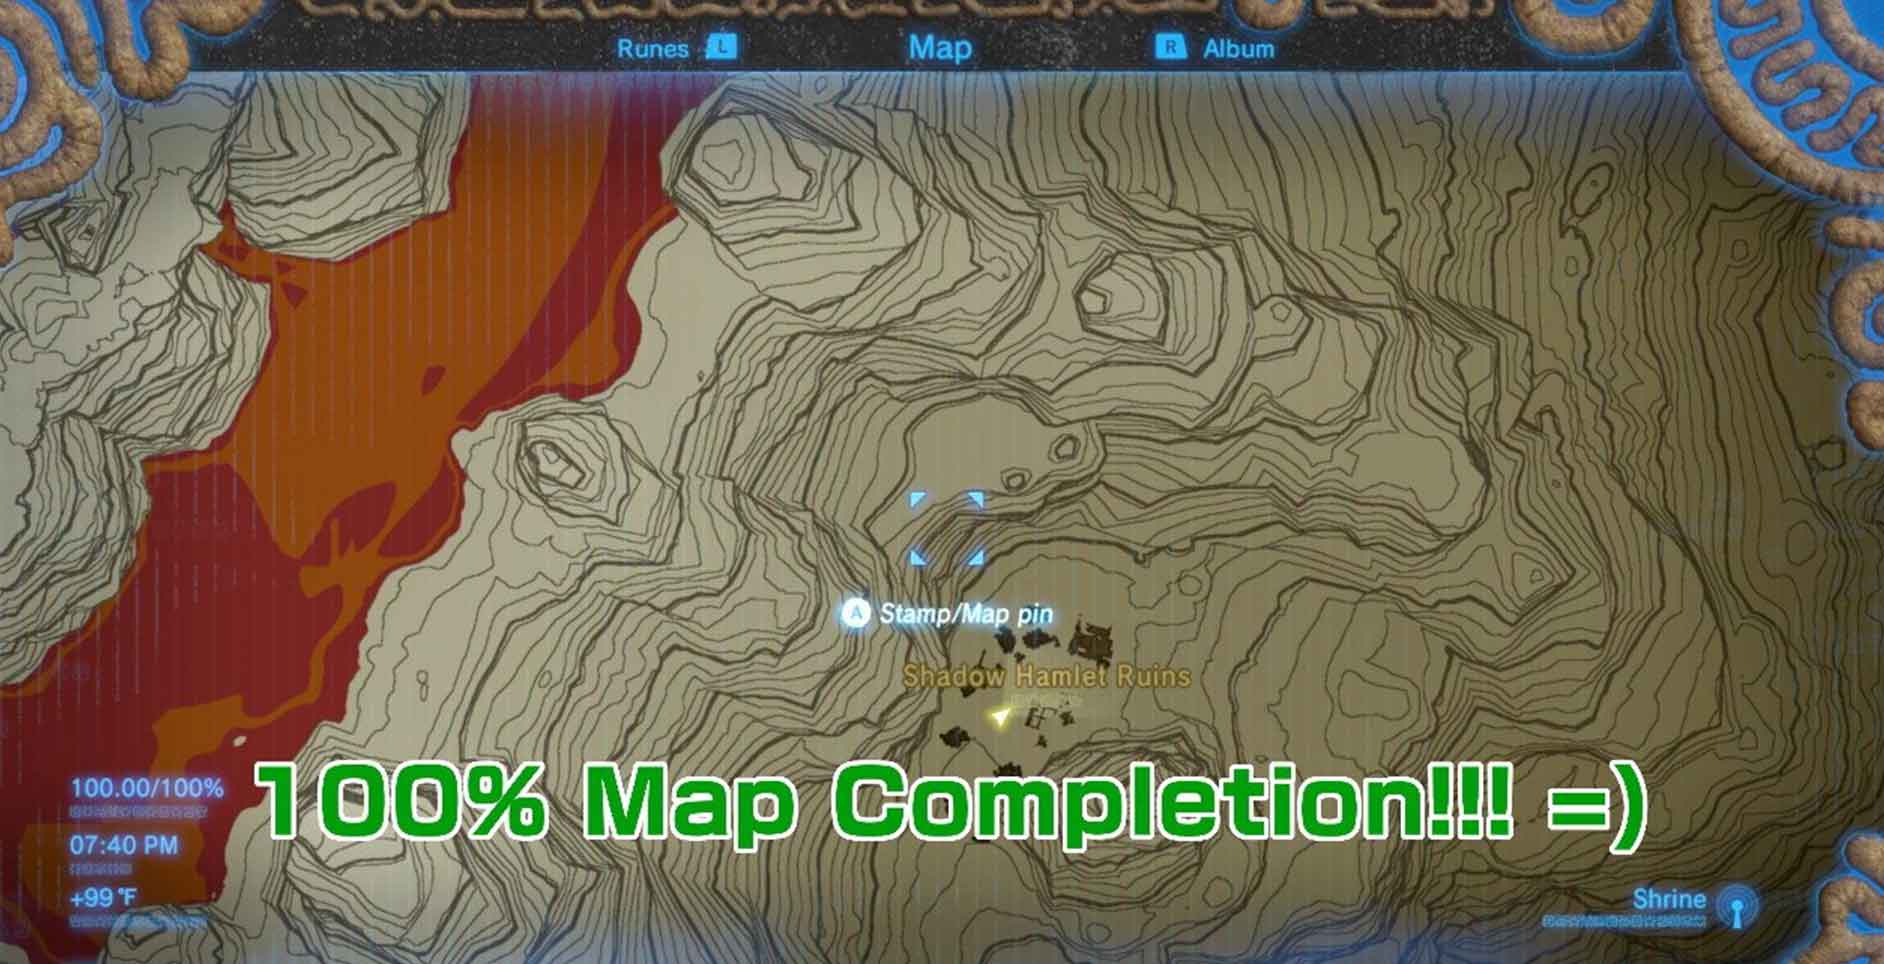 How long does it take to get to 100% on BotW?